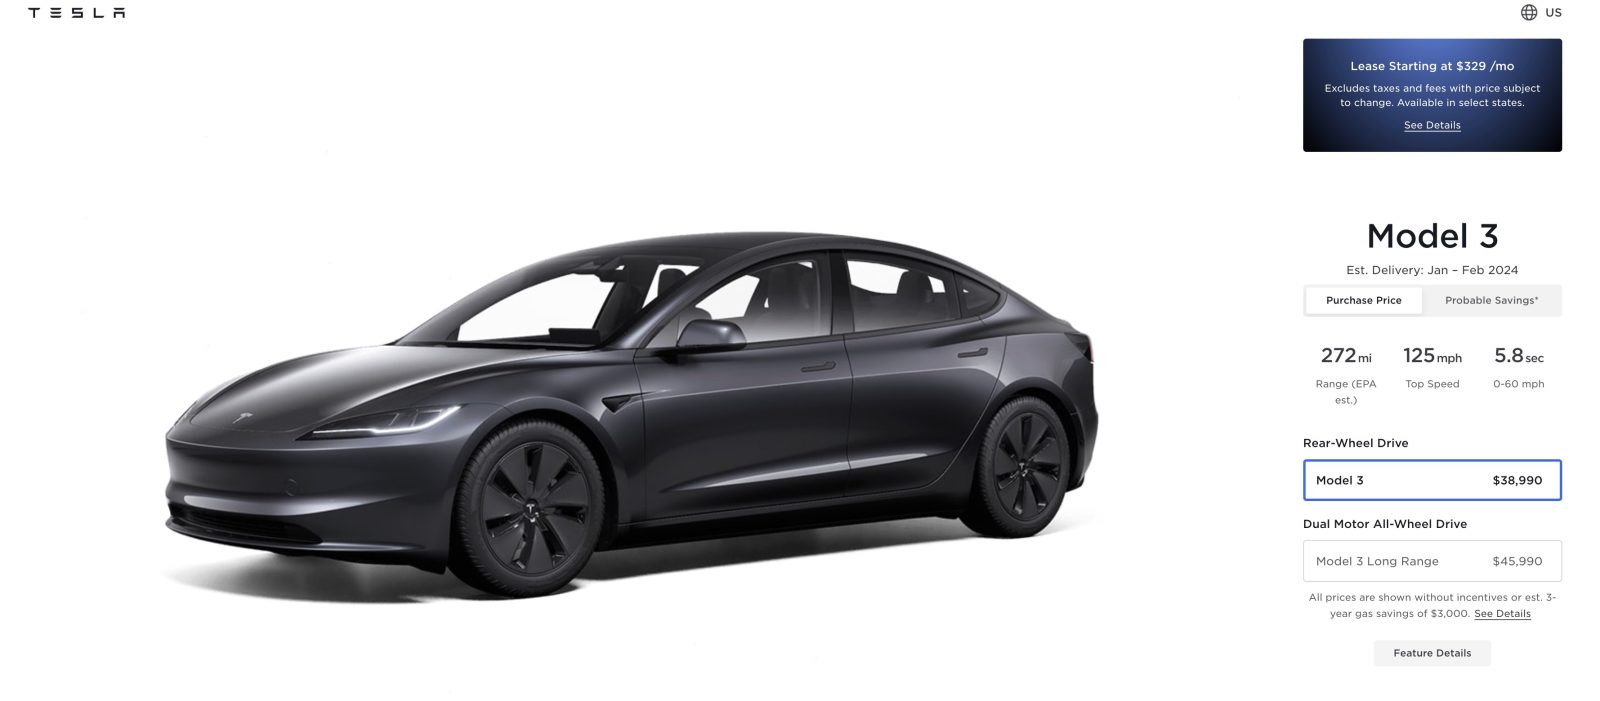 Tesla Launches Model 3 Highland in North America With an